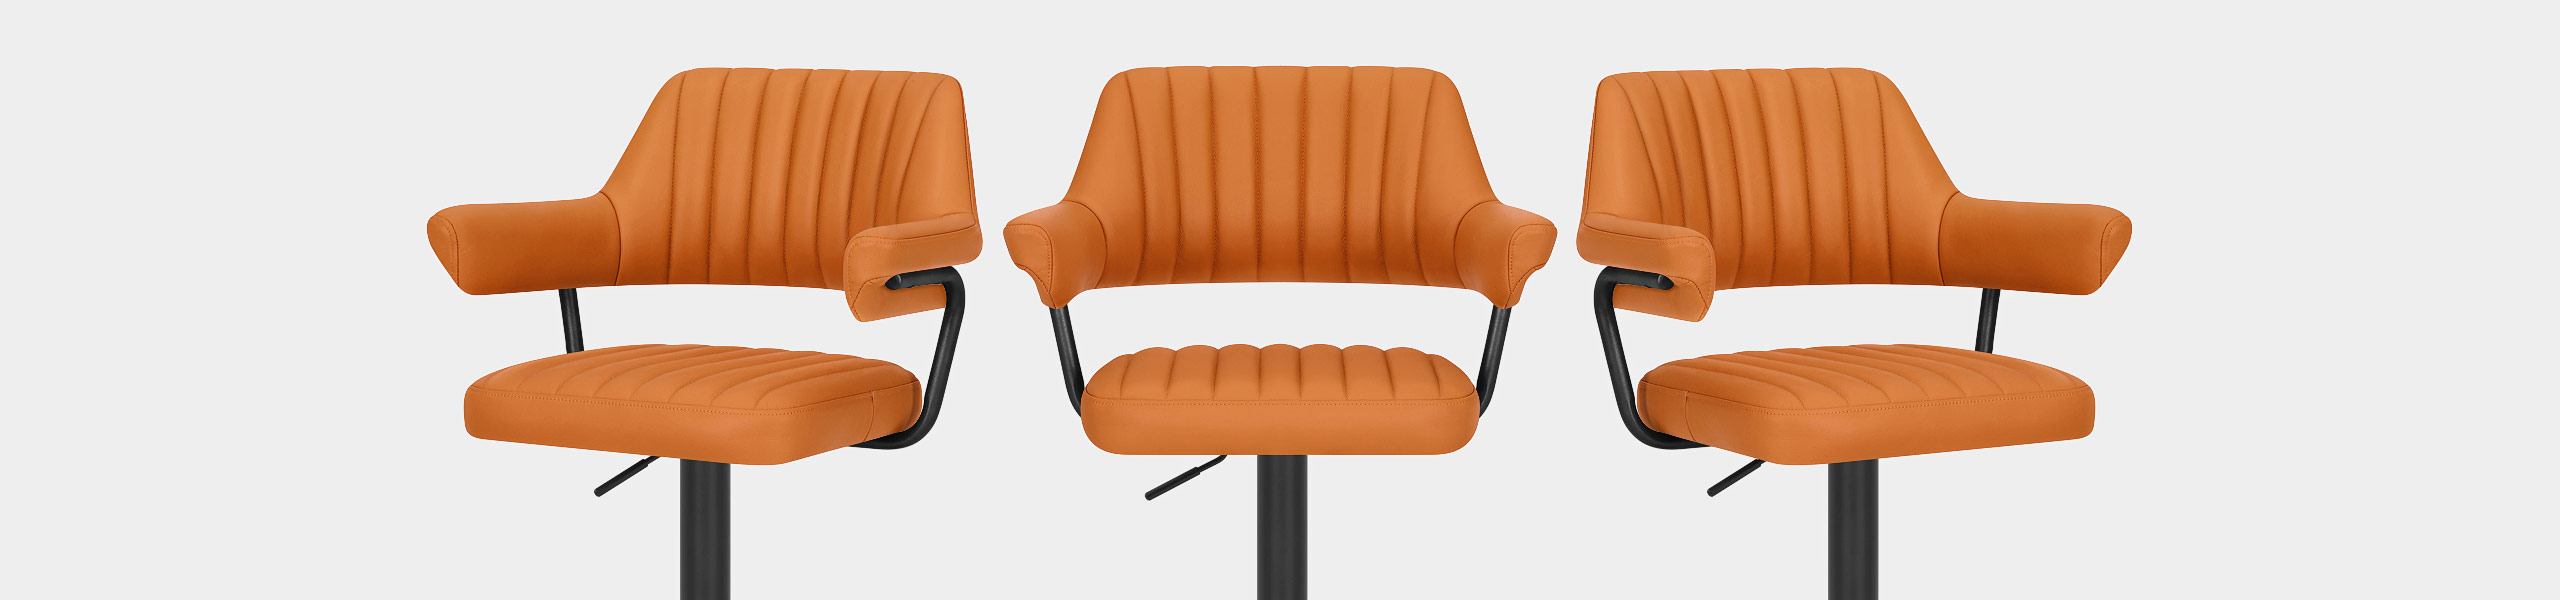 Scout Real Leather Stool Orange Video Banner